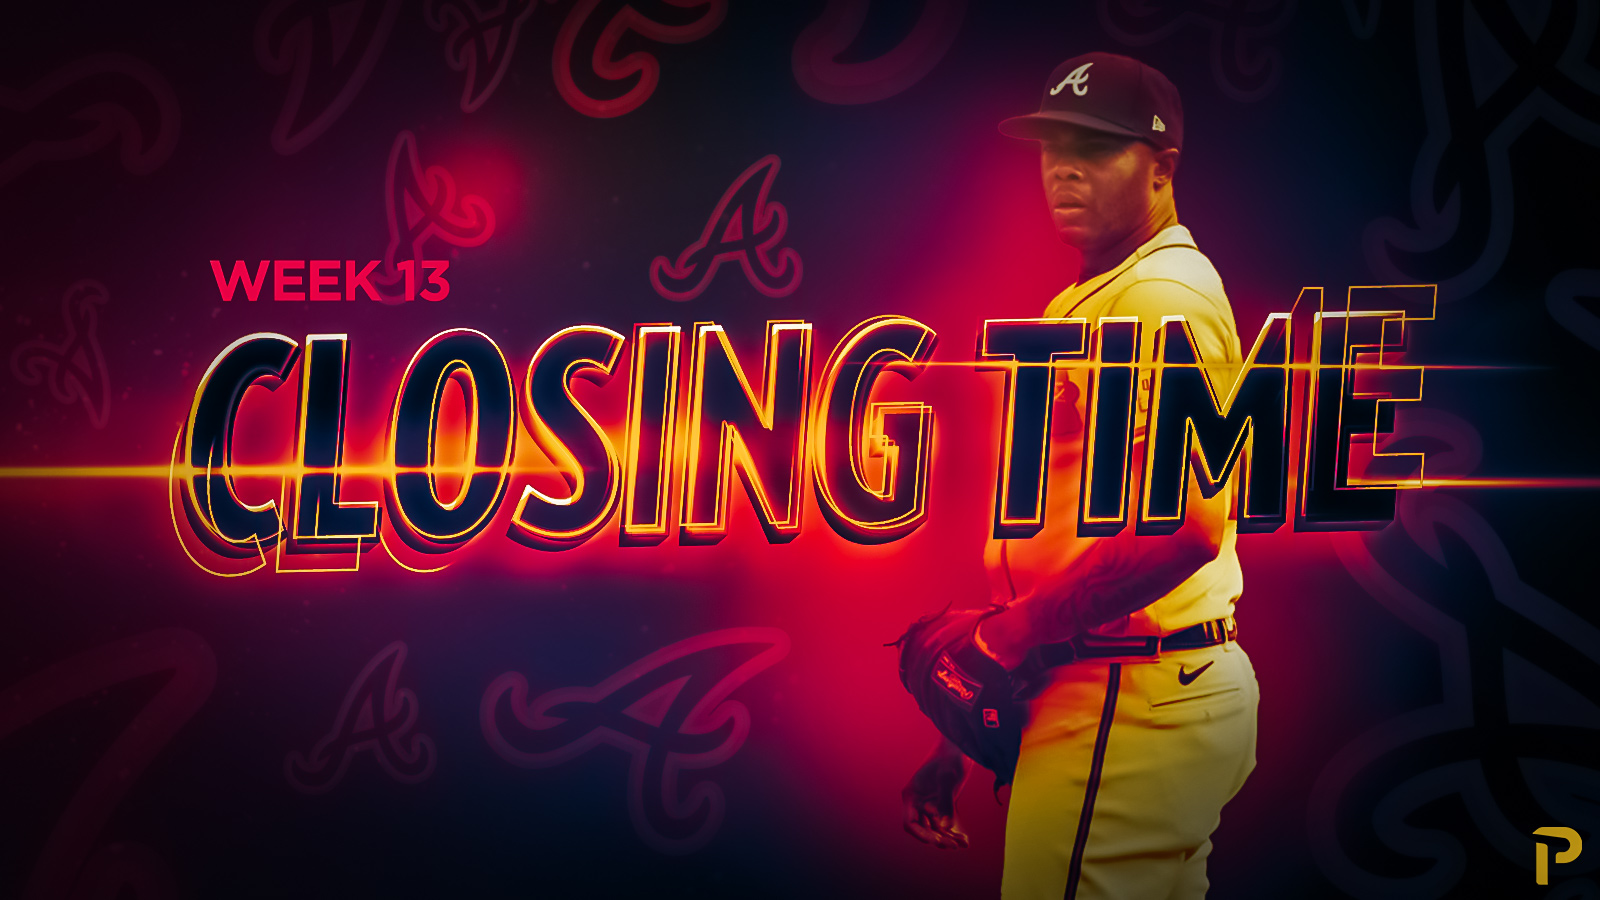 Closing Time 4/27: Ranking the Top 30 Closers every Tuesday